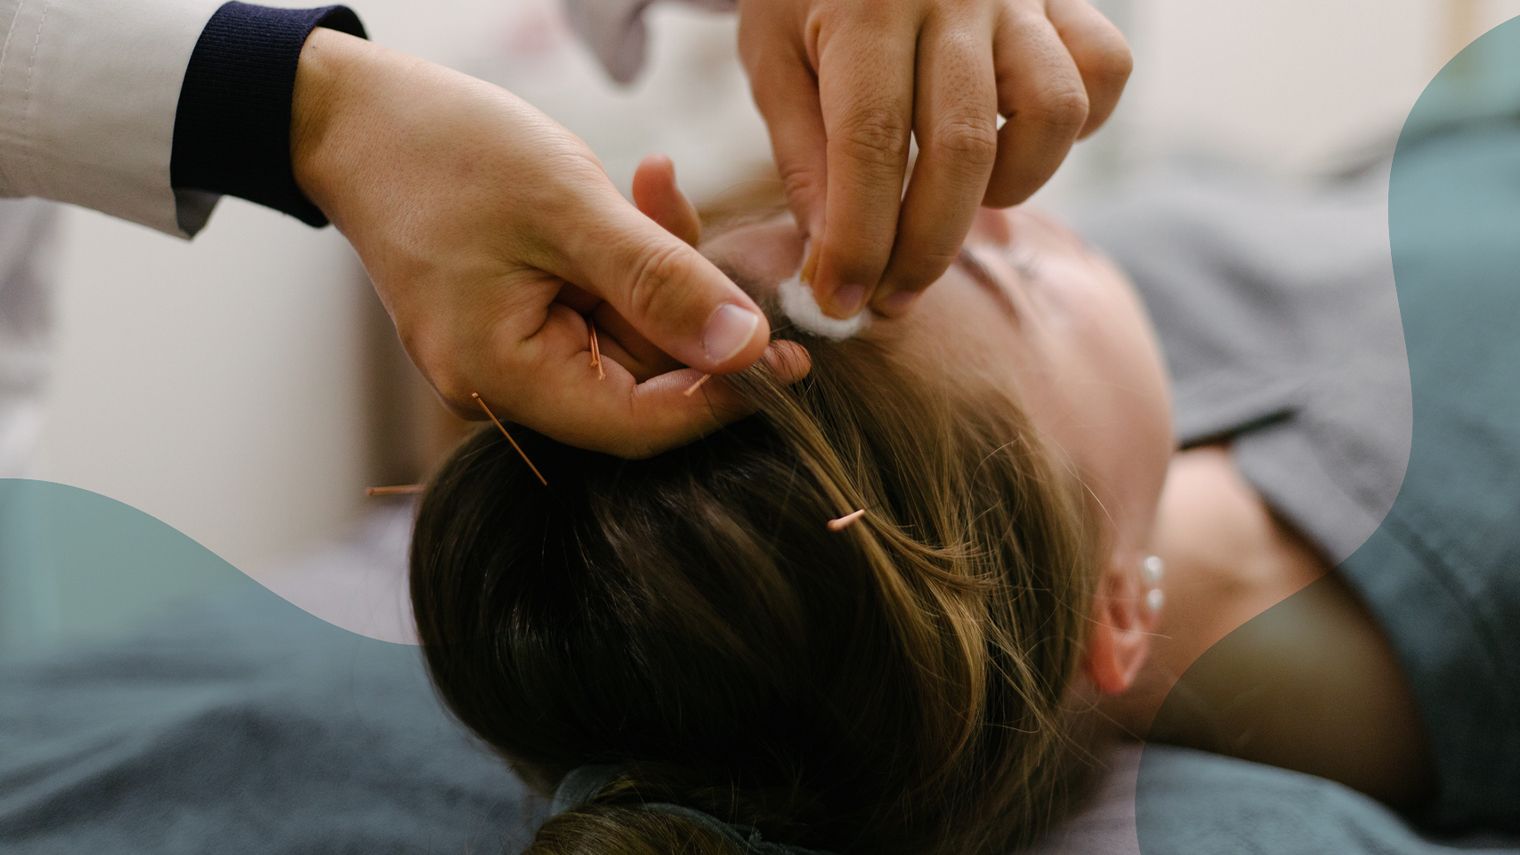 I Tried Acupuncture for Migraine: Here's What Happened